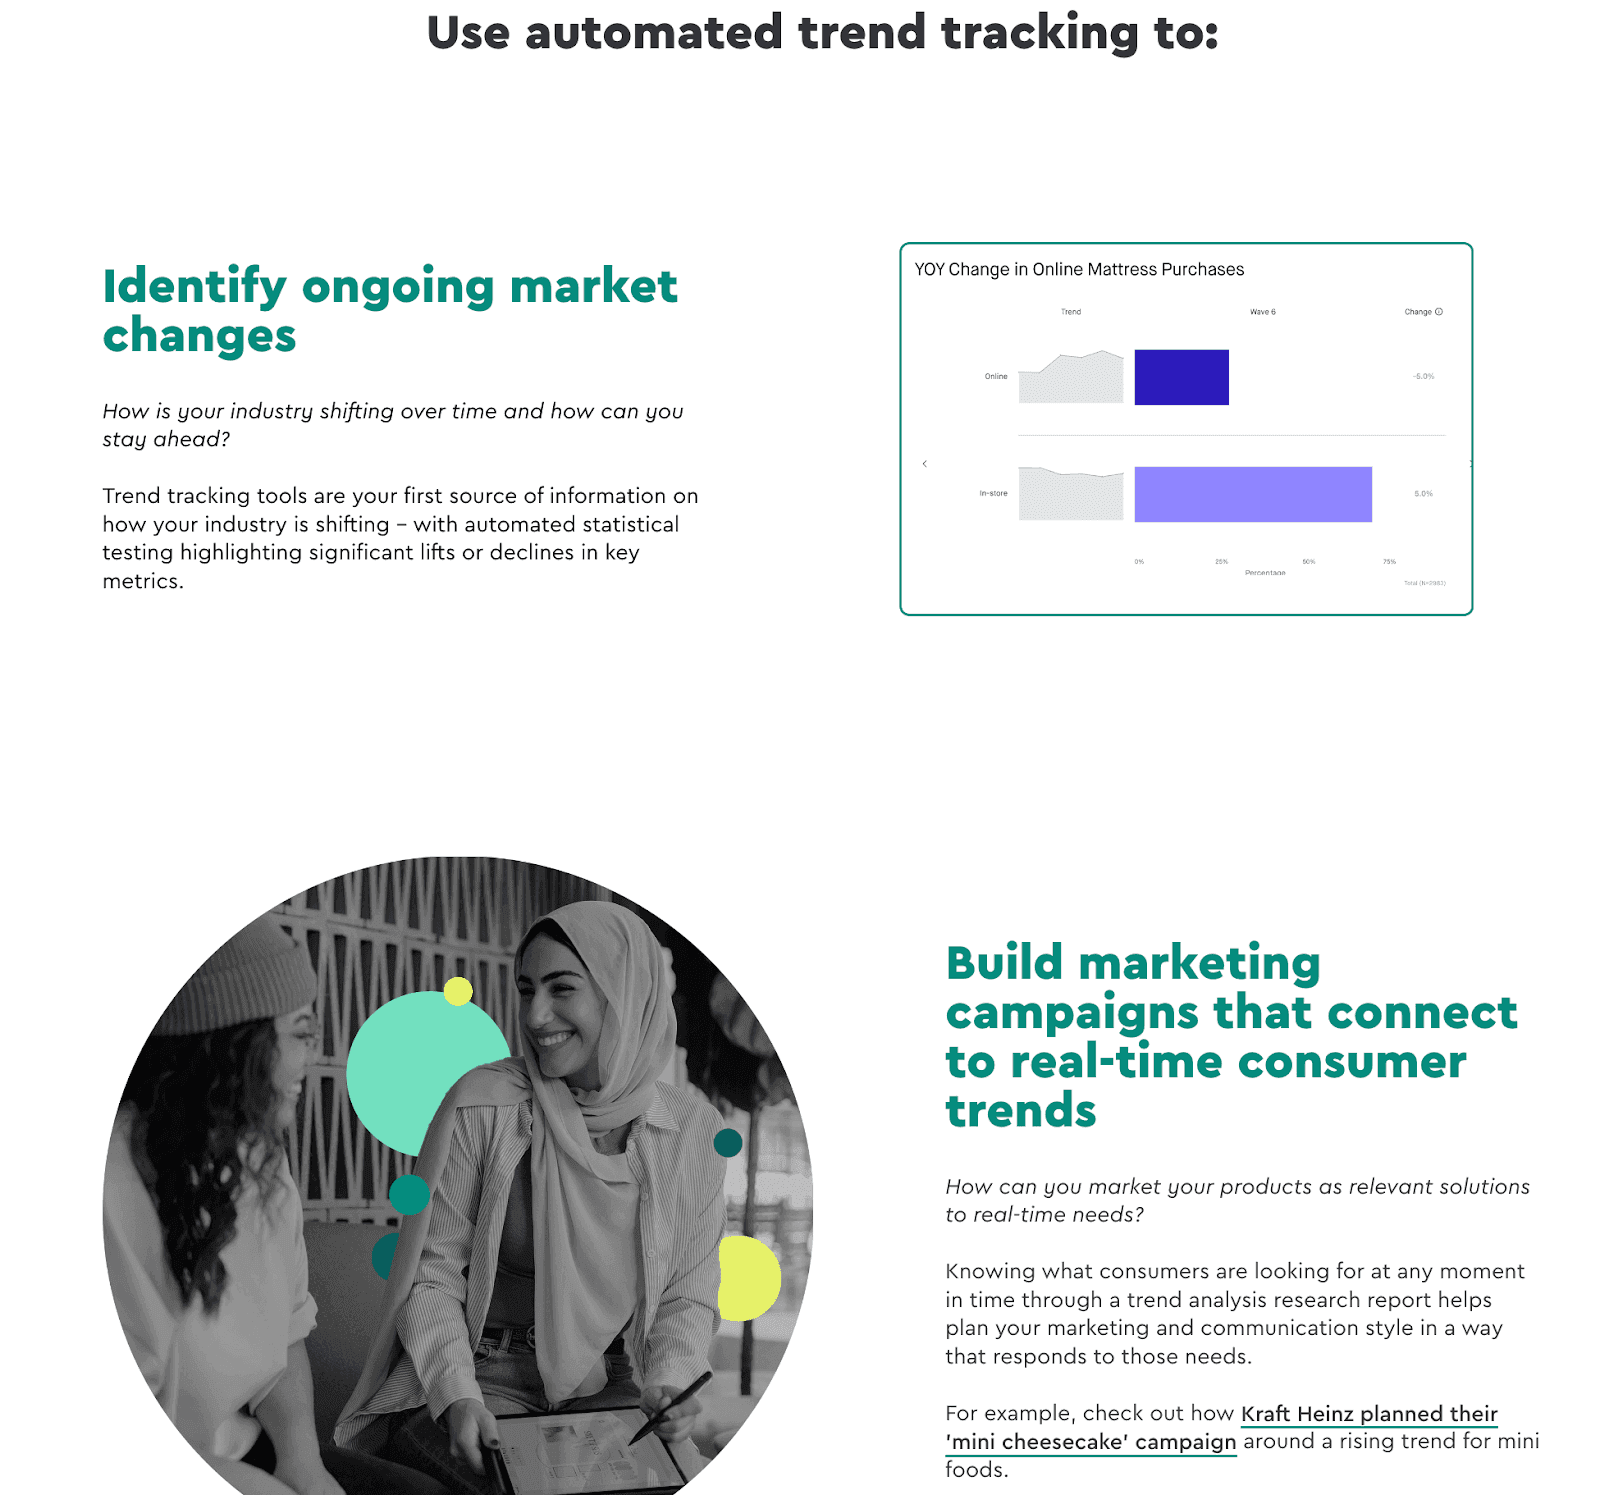 Quantilope website - Use automated trend tracking to identify ongoing market changes - Build marketing campaigns that connect to real-time consumer trends